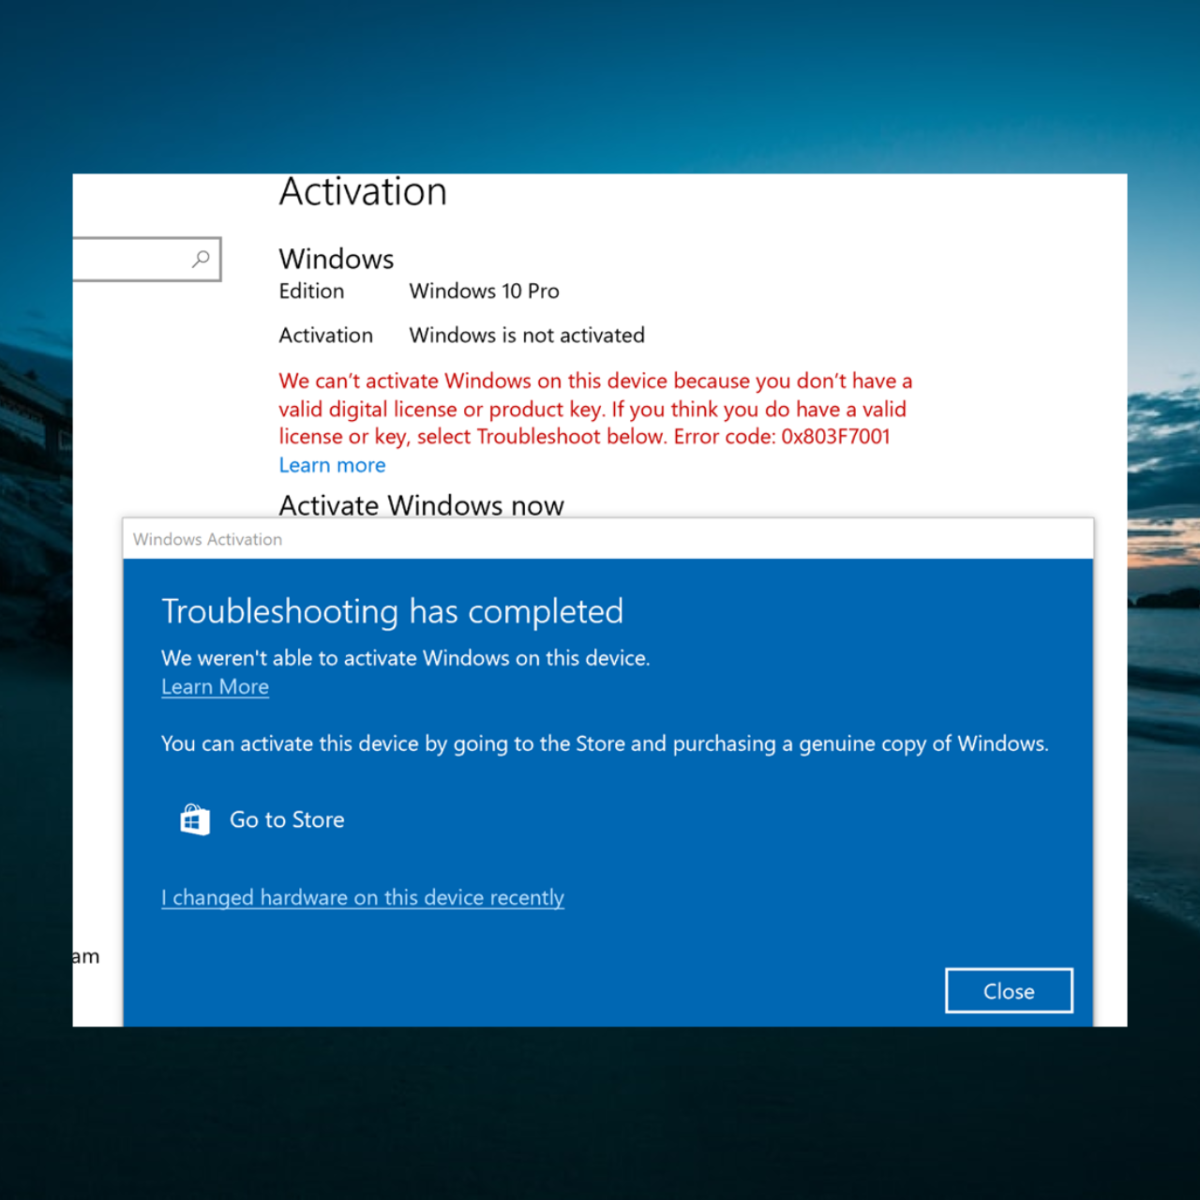 Do you lose your Windows license if you reinstall Windows?